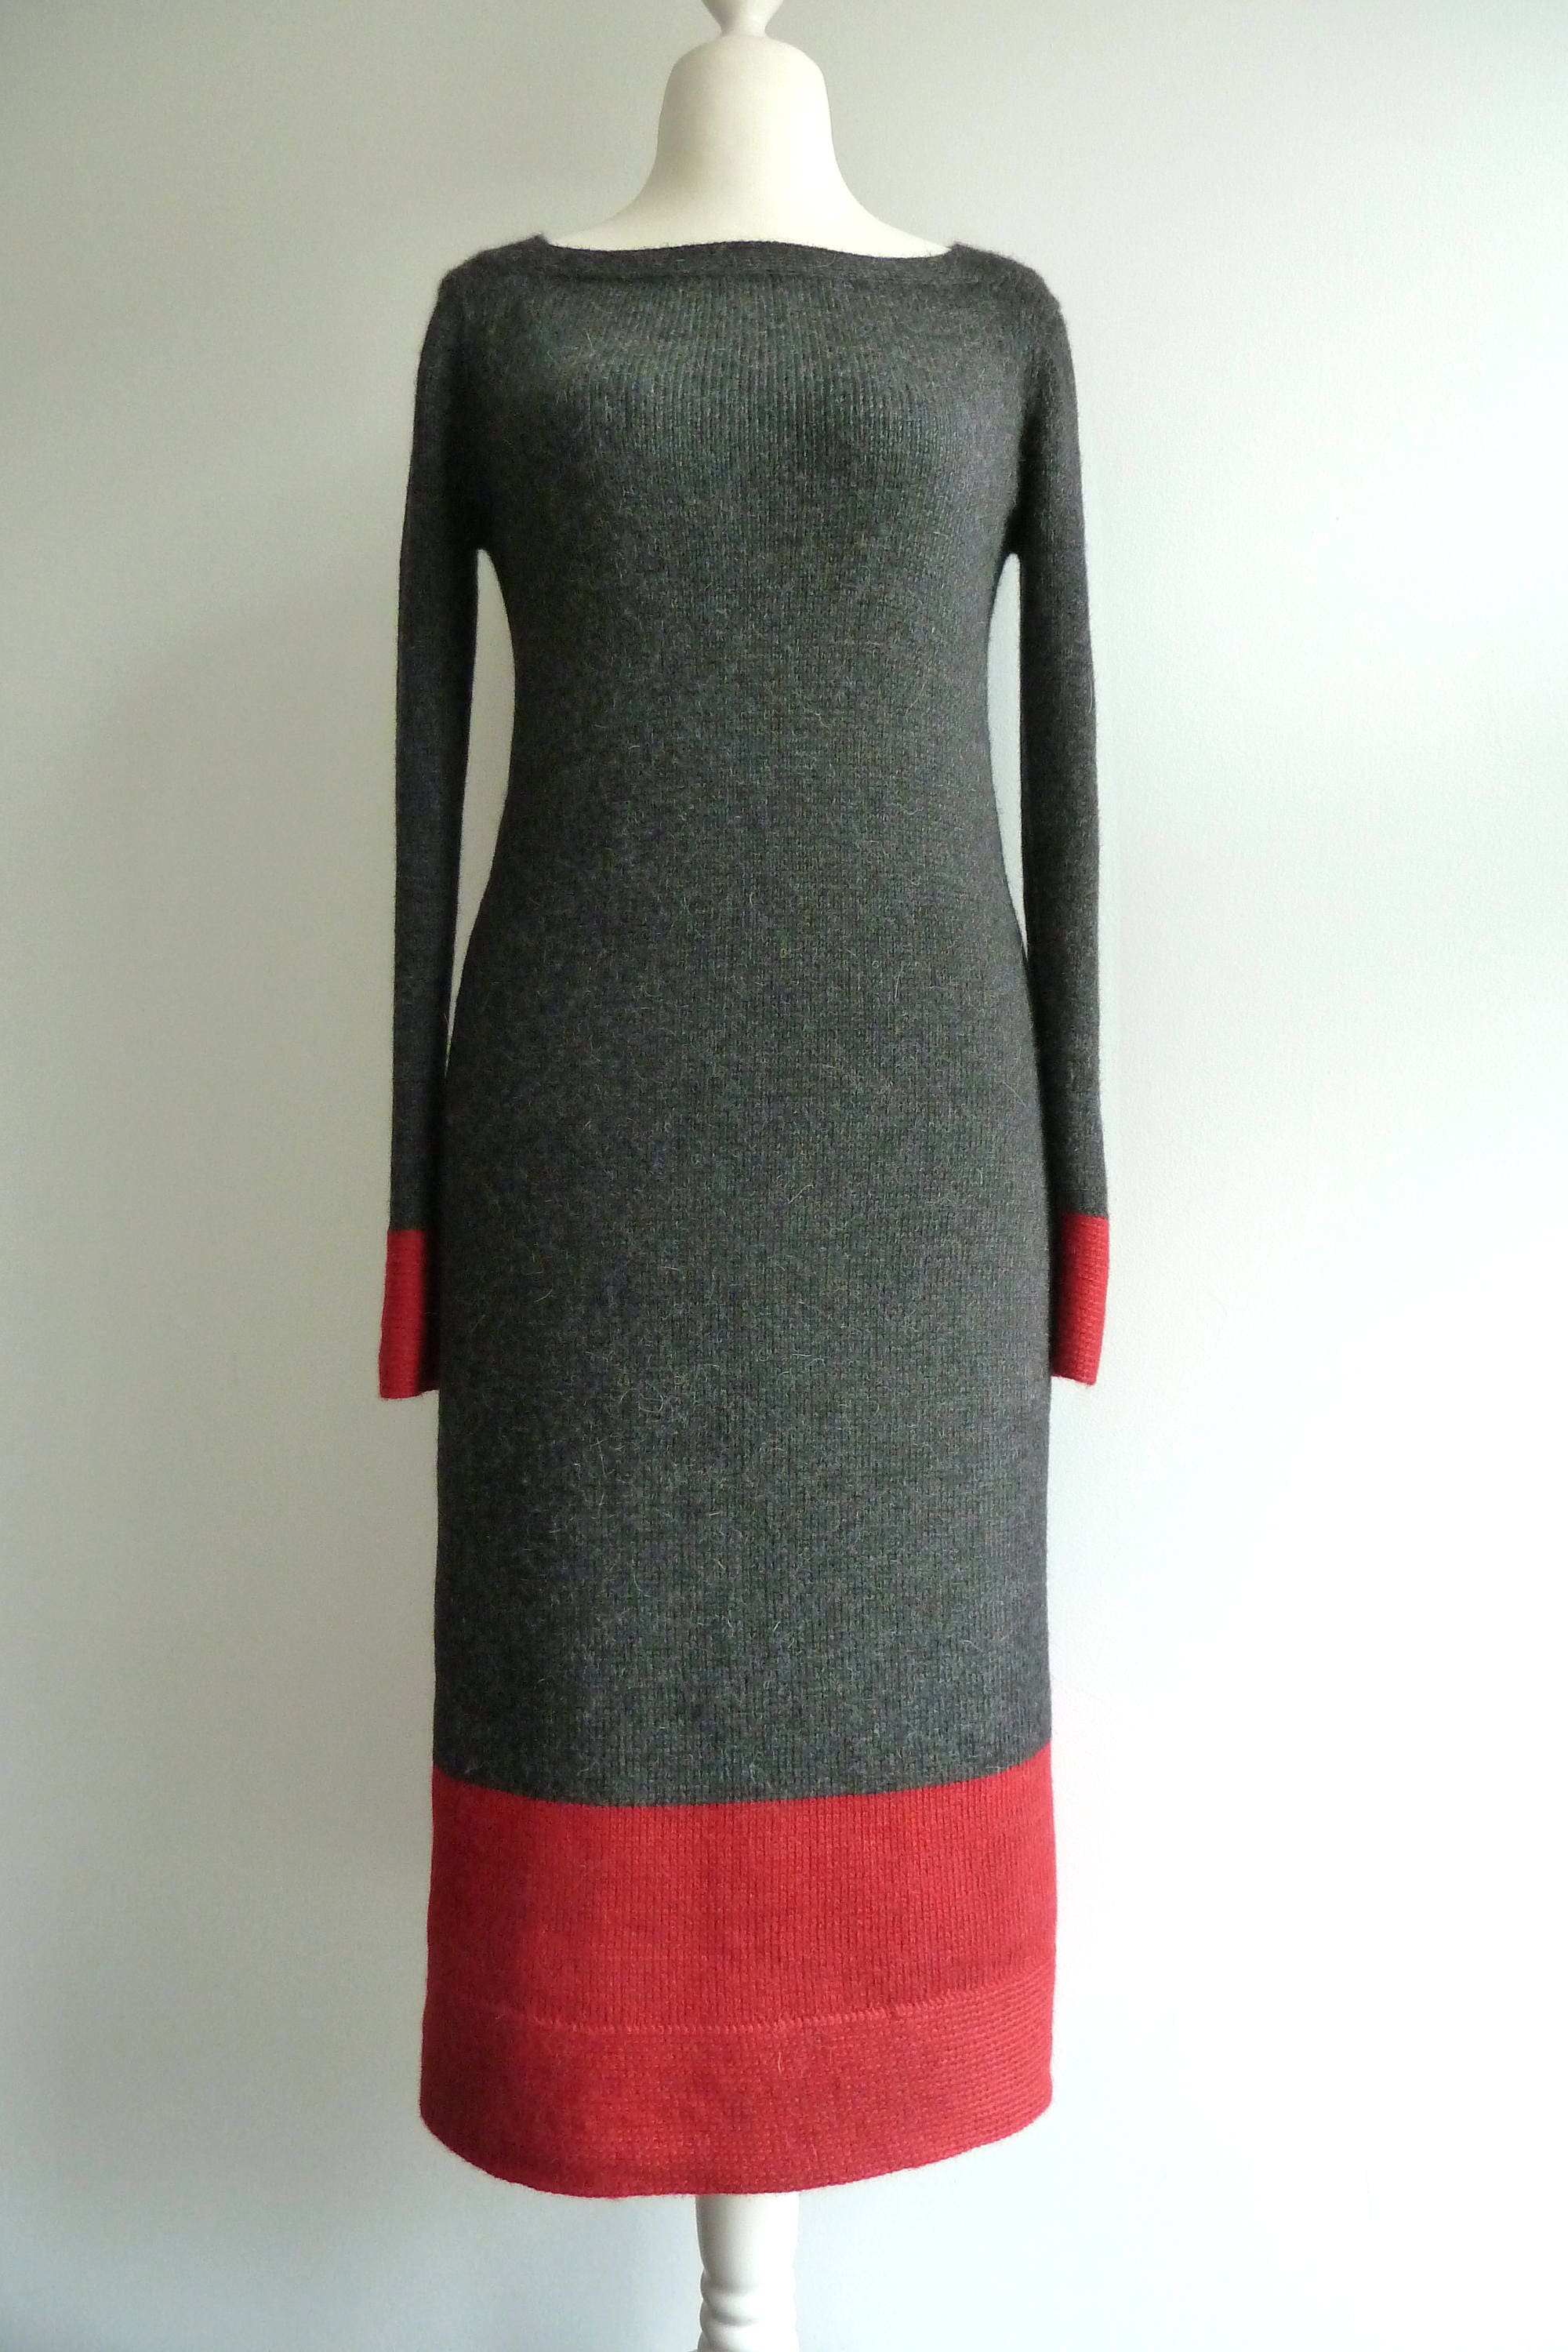 Knitted Dress From Baby Alpaka Woll other Colores Available - Etsy